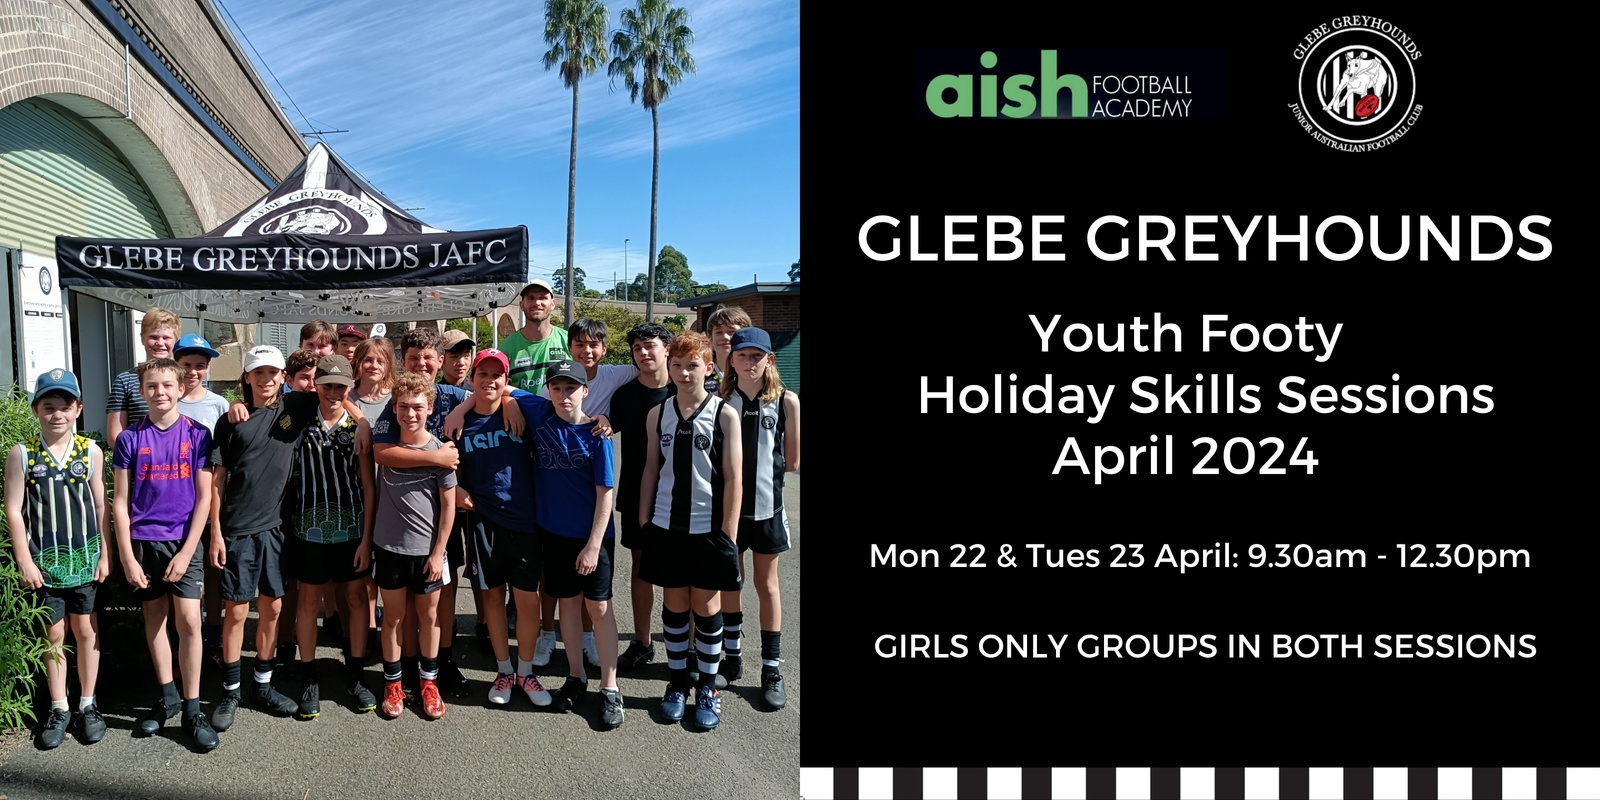 Banner image for Glebe Greyhounds & Aish Academy Youth Footy Super Skills April 2024